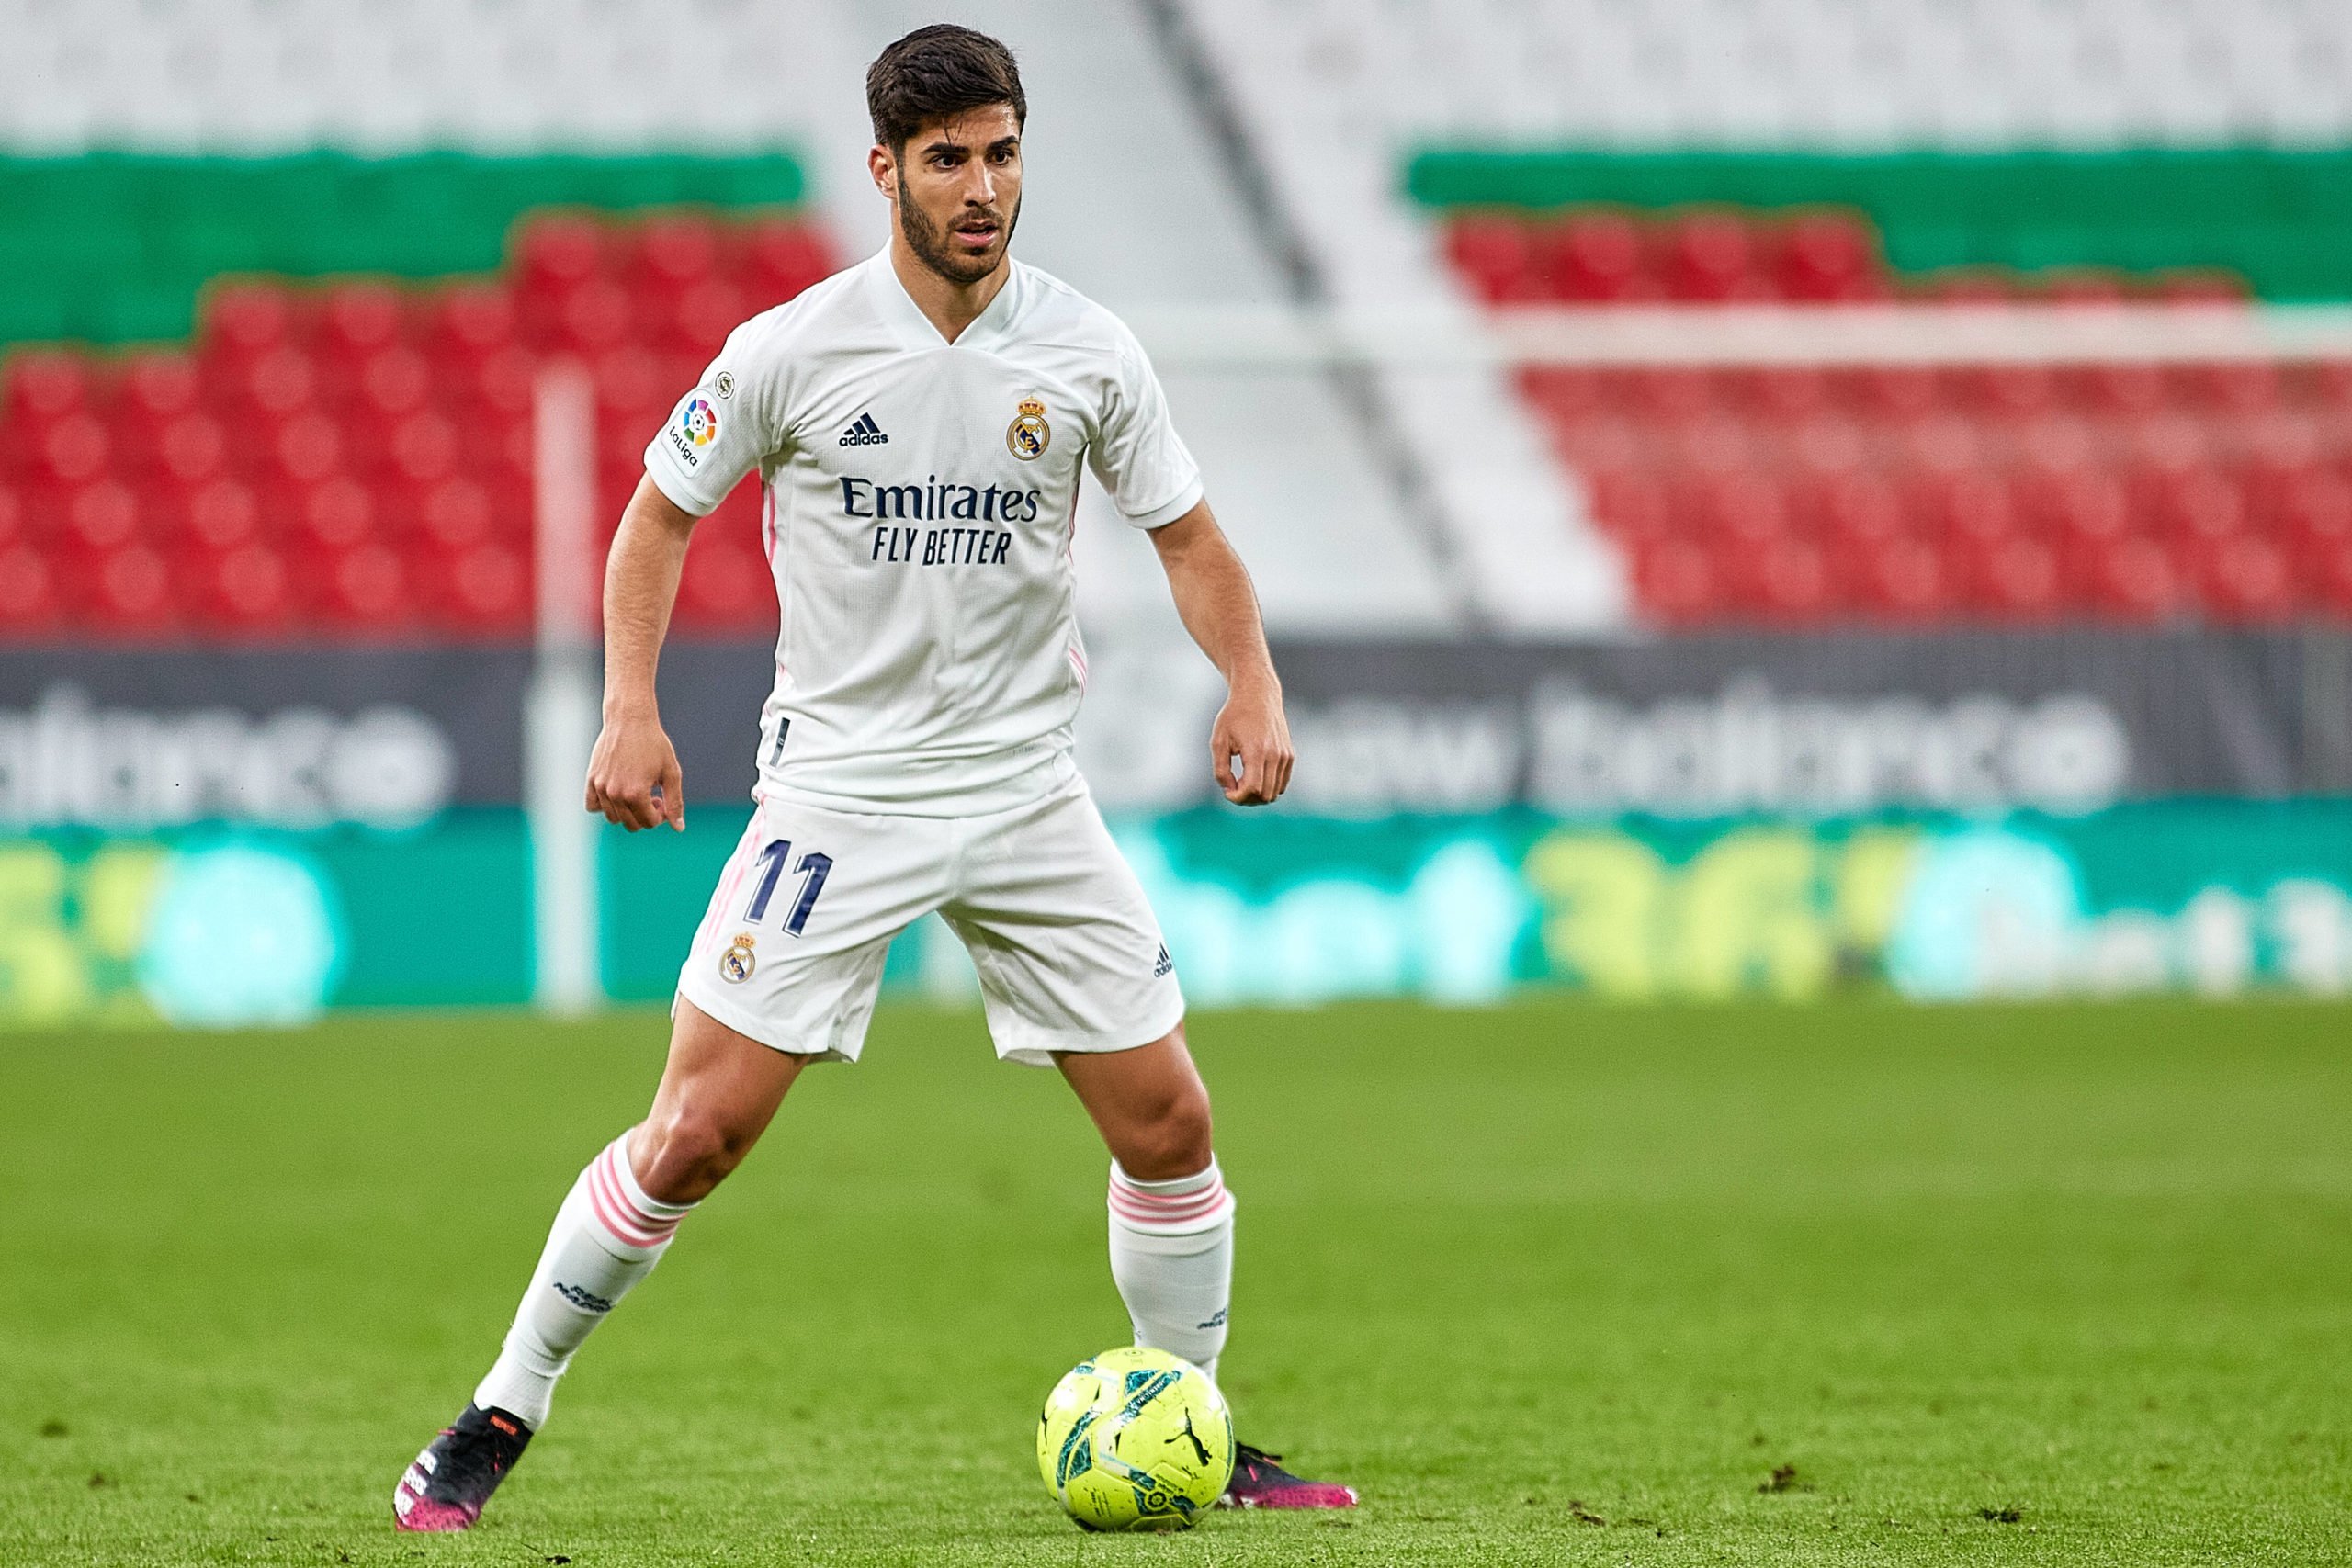 Everton locked in a three-way battle for Asensio who is seen in the picture